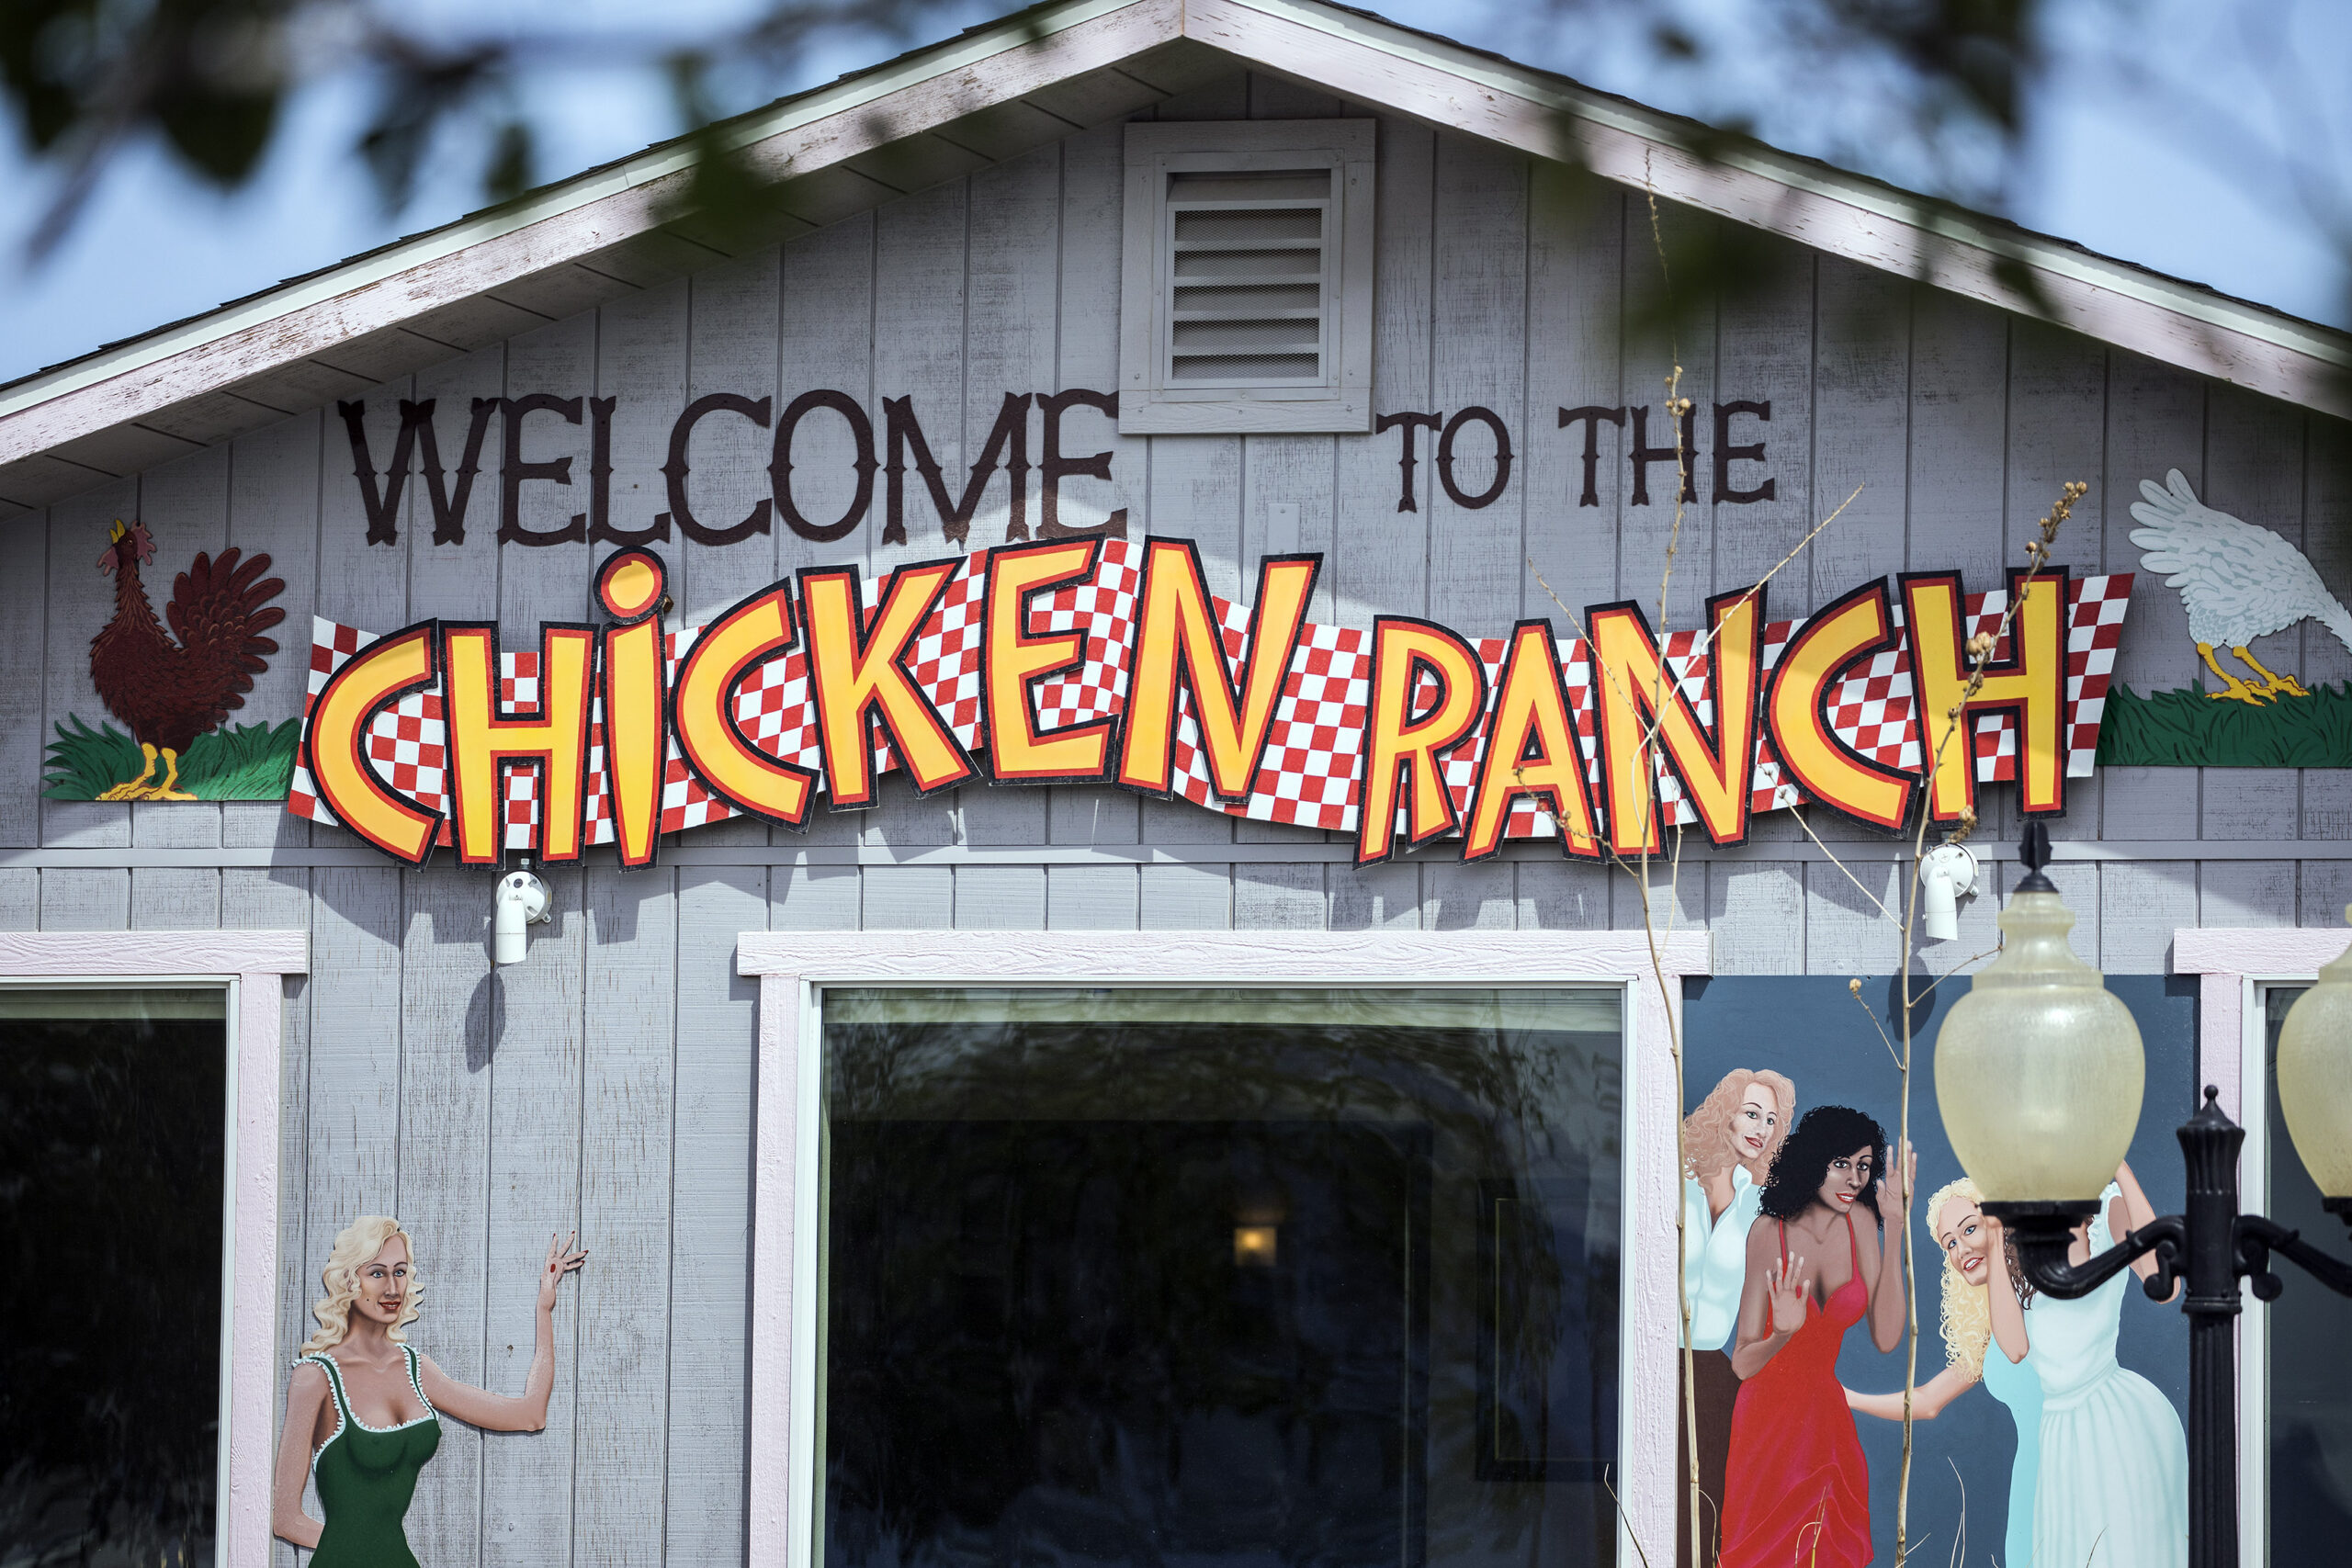 The front entrance to the Chicken Ranch brothel